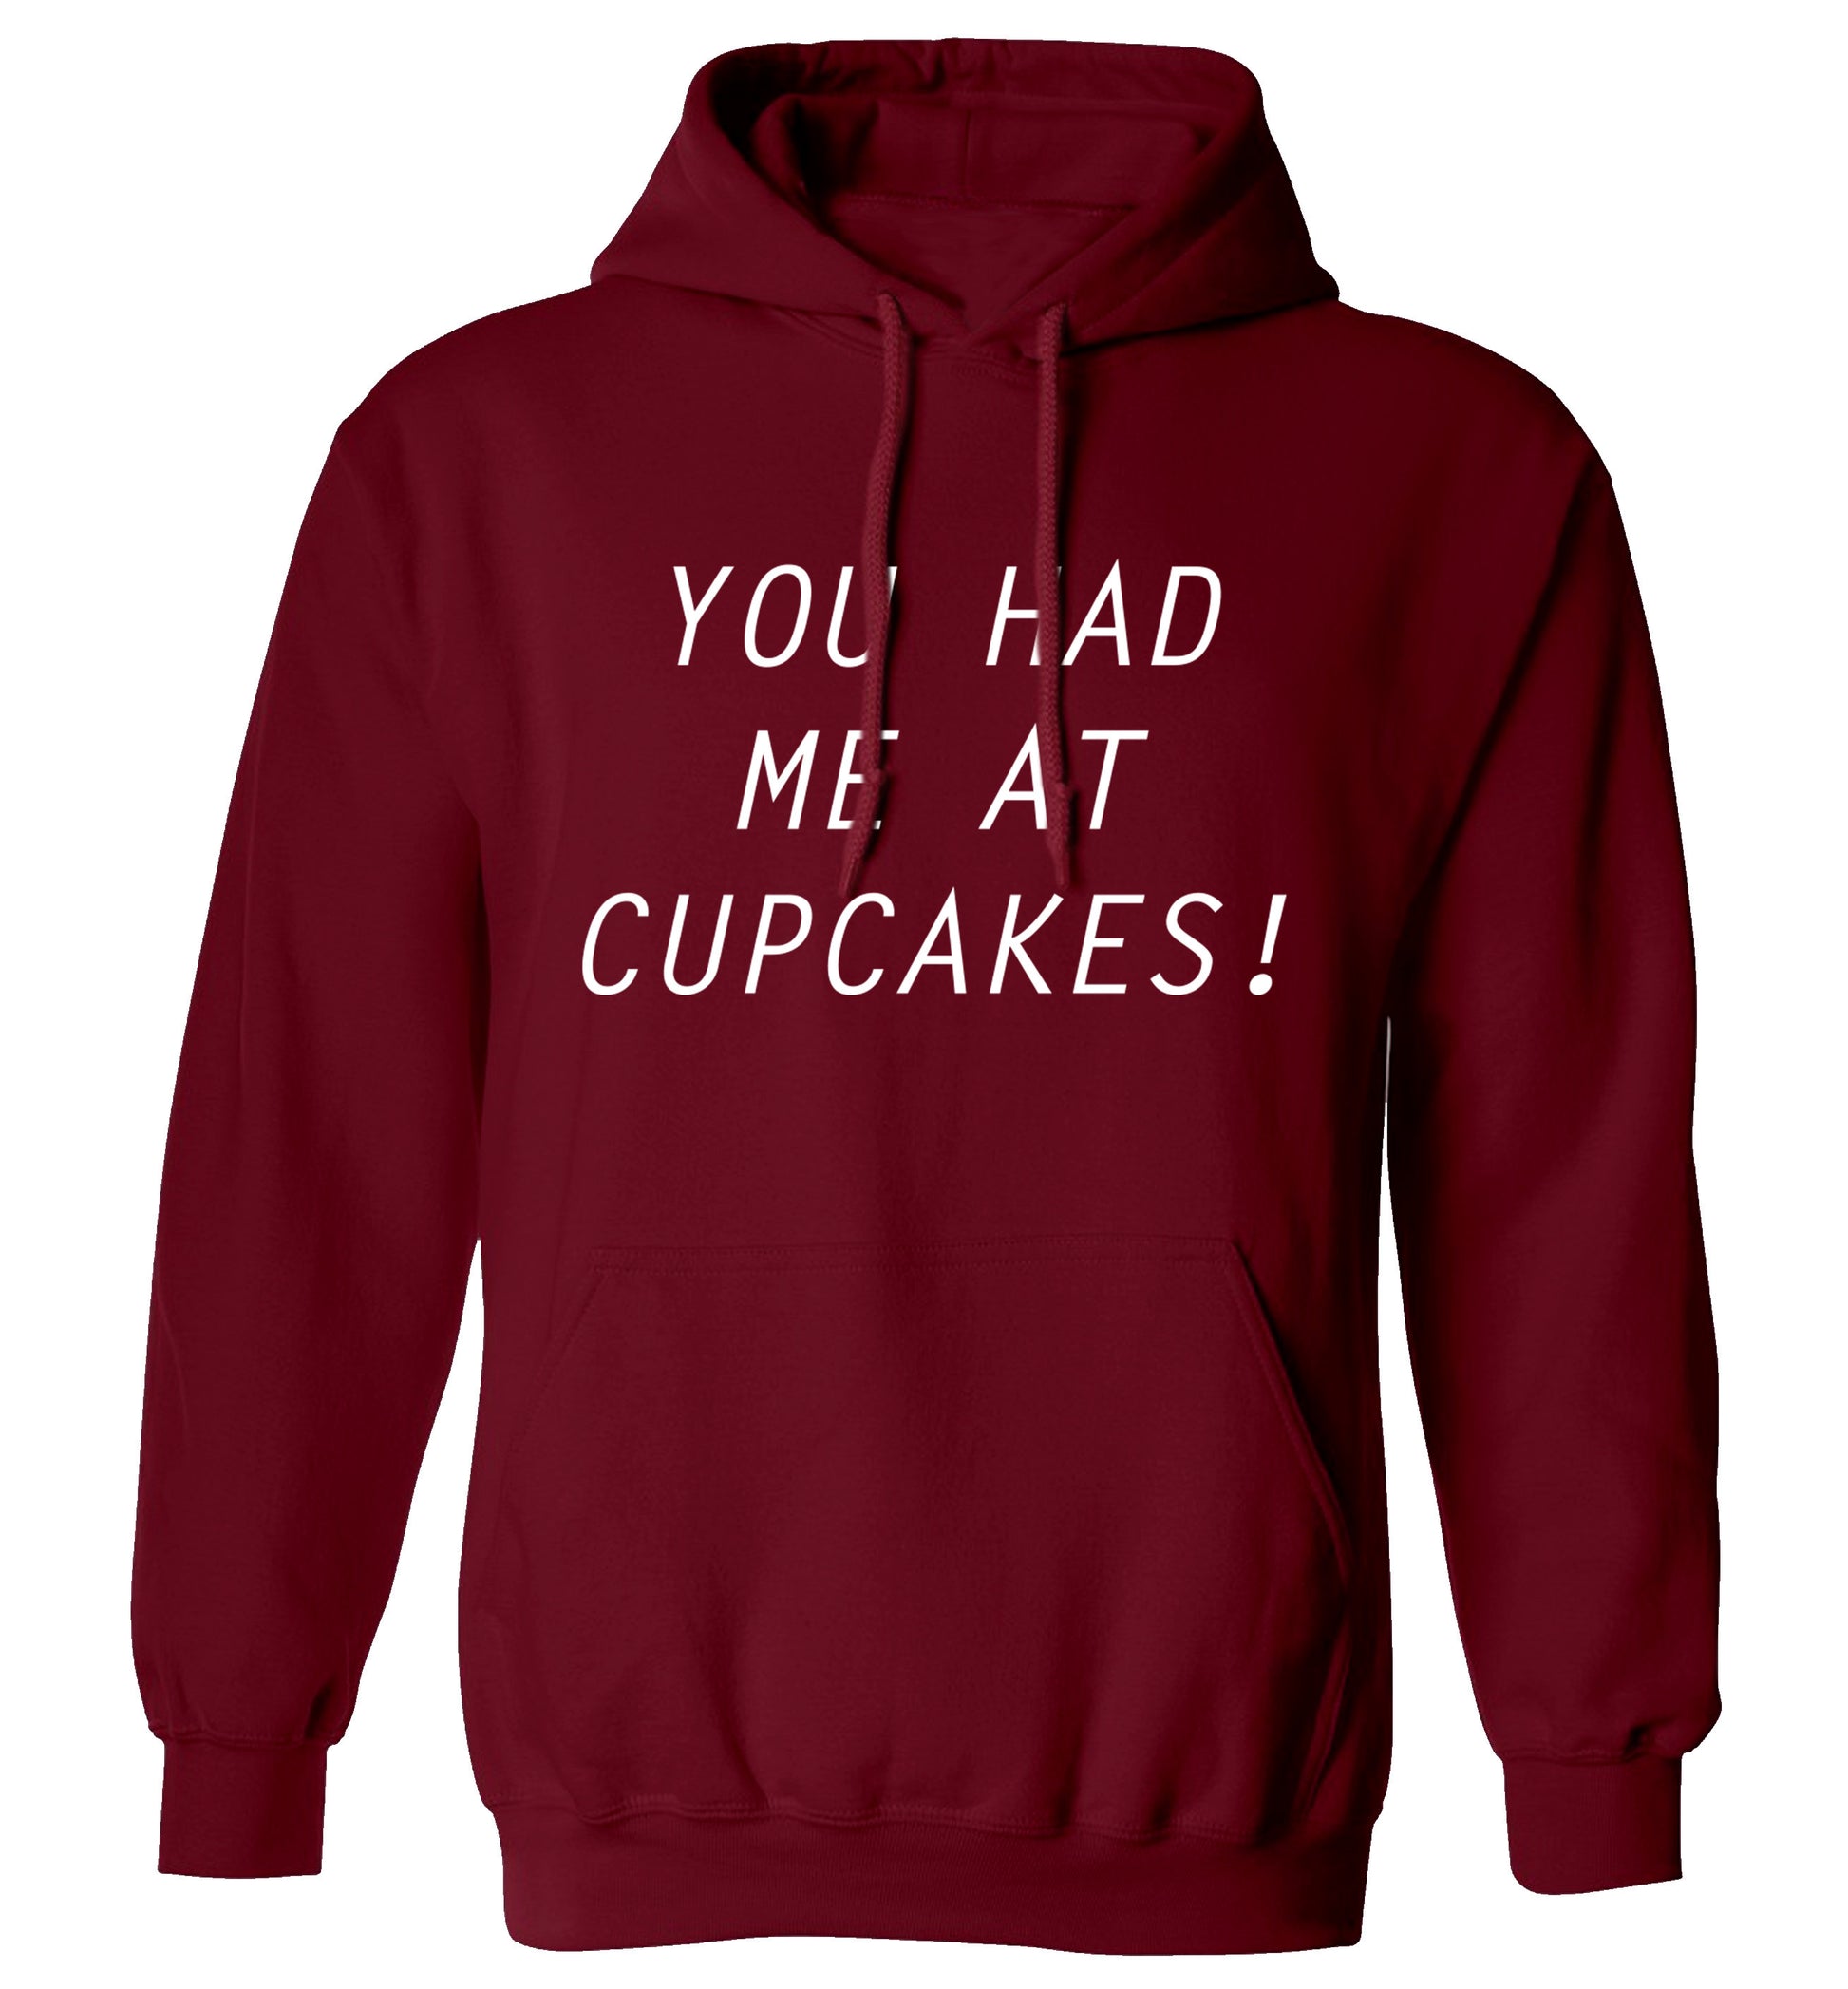 You had me at cupcakes adults unisex maroon hoodie 2XL